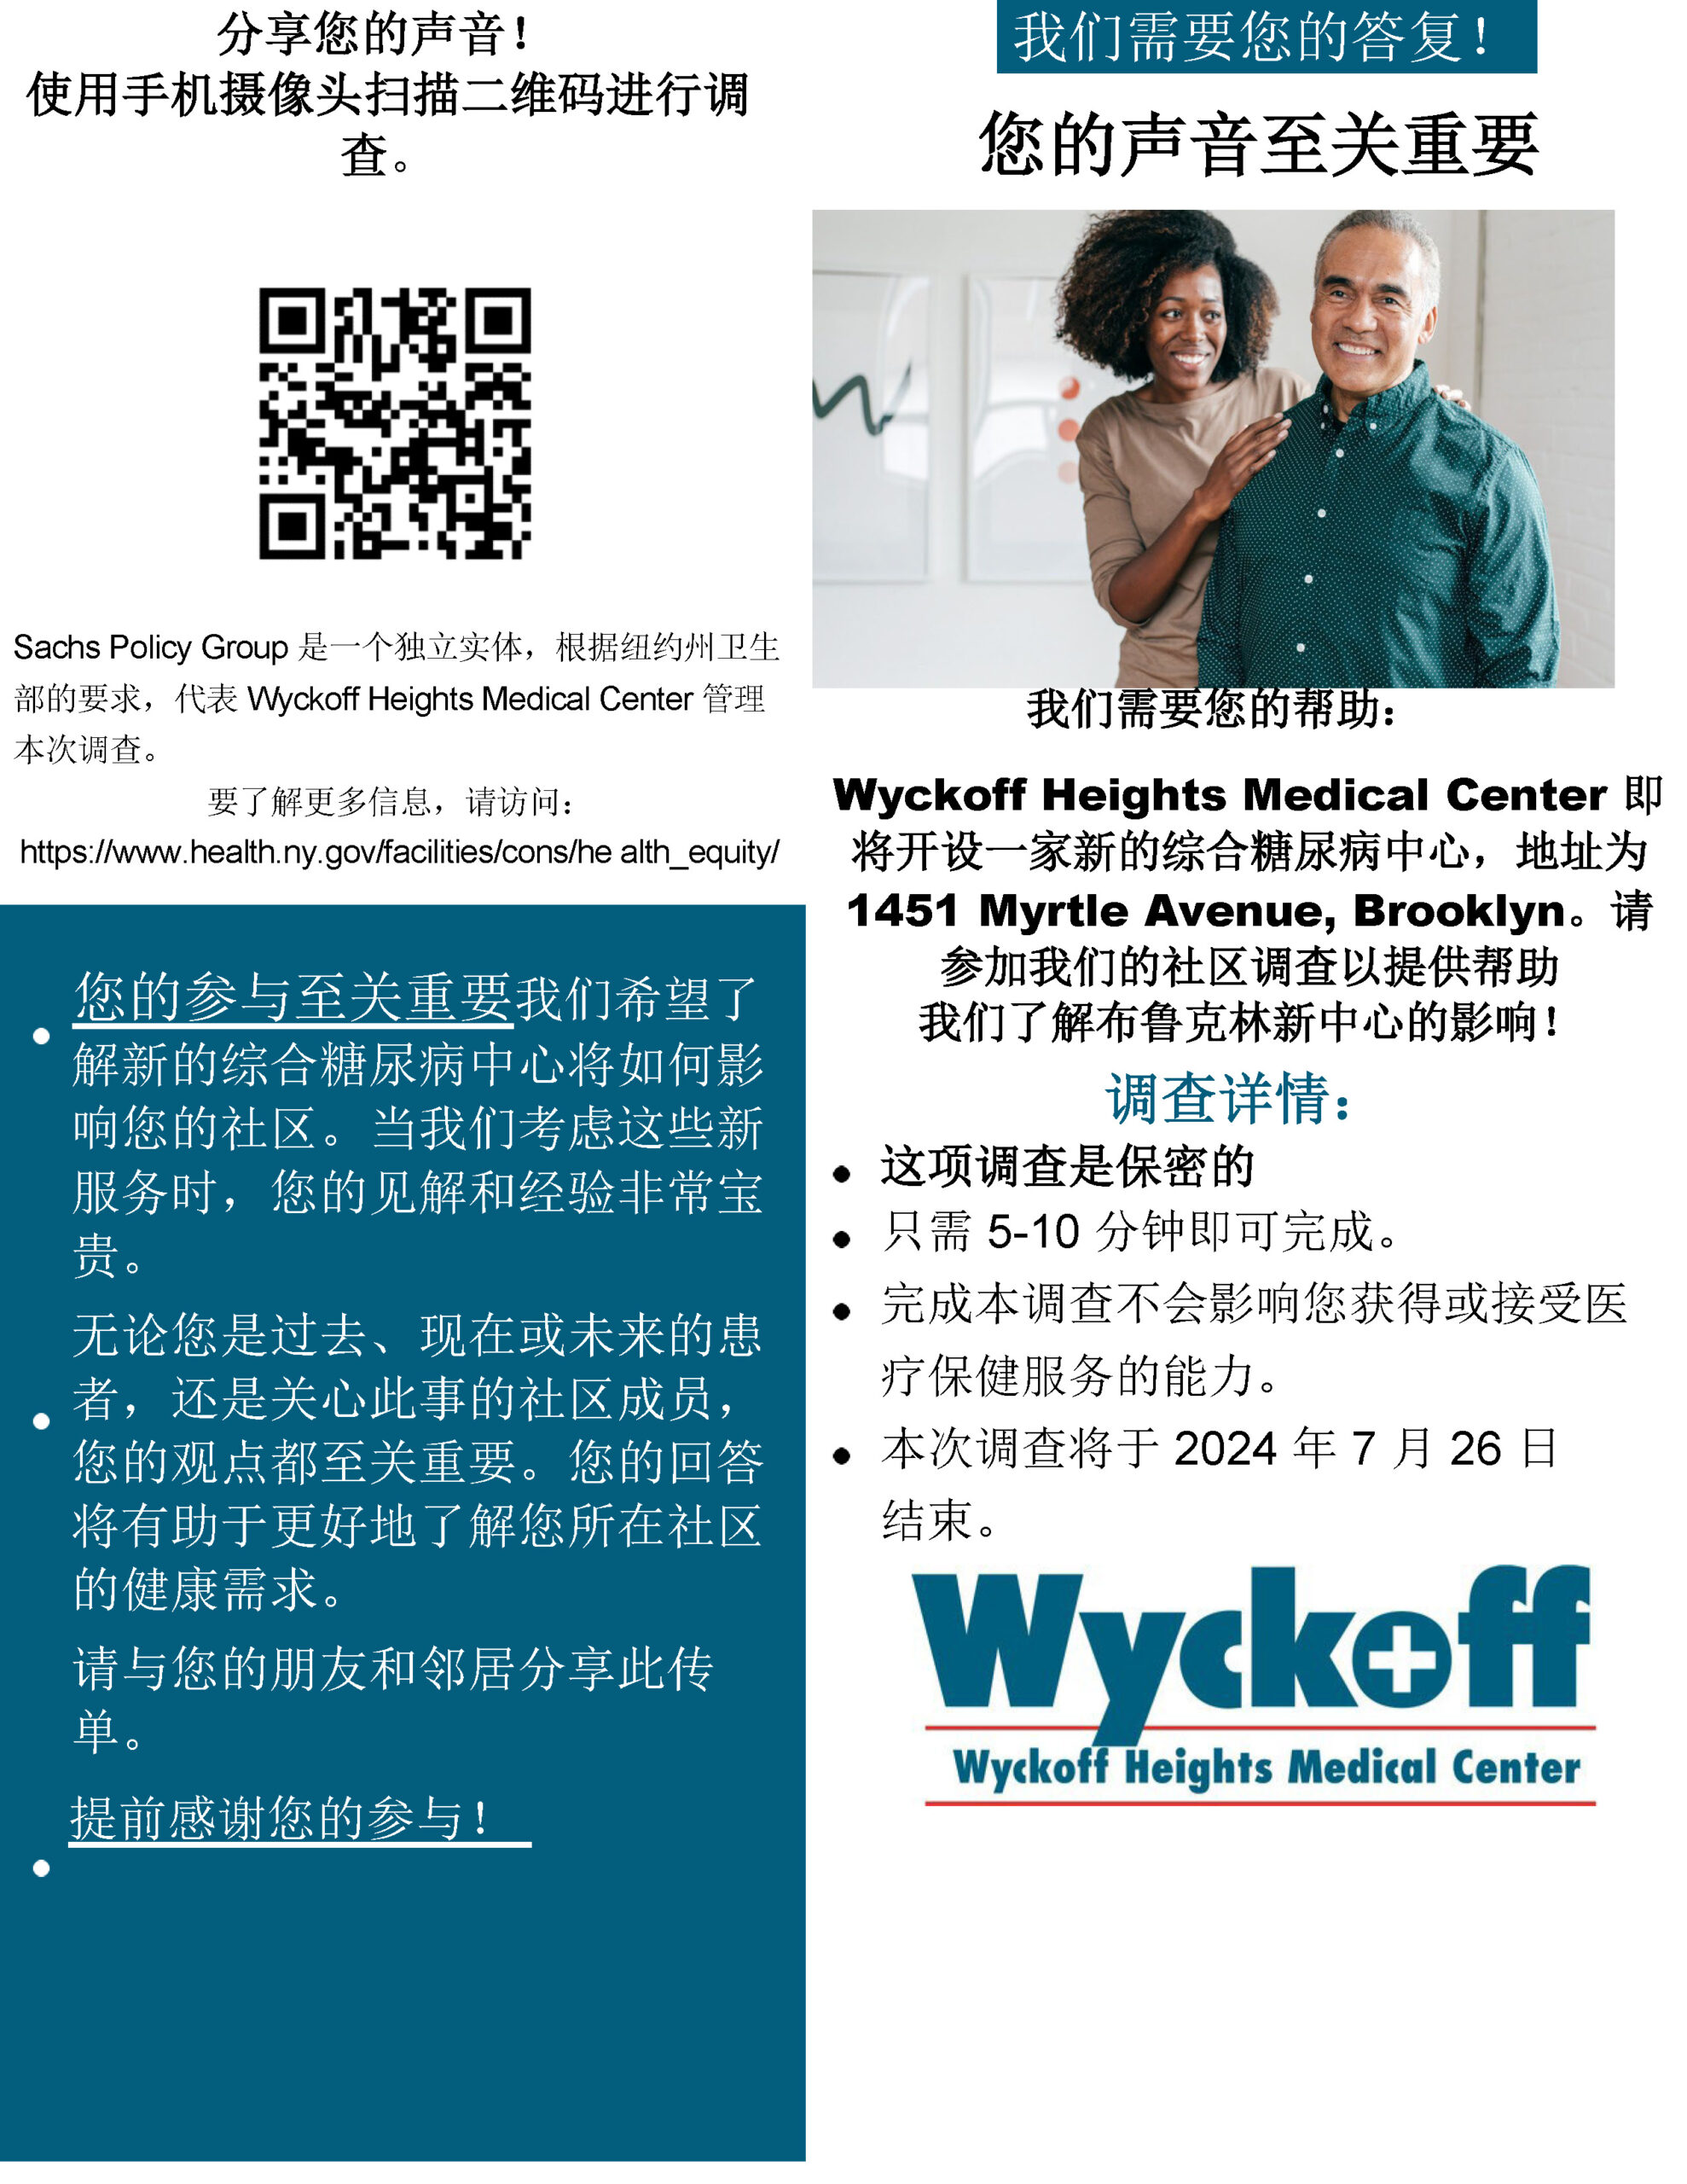 Wyckoff Heights Survey Flier (diabetes) 7-9-24_Chinese-Cantonese